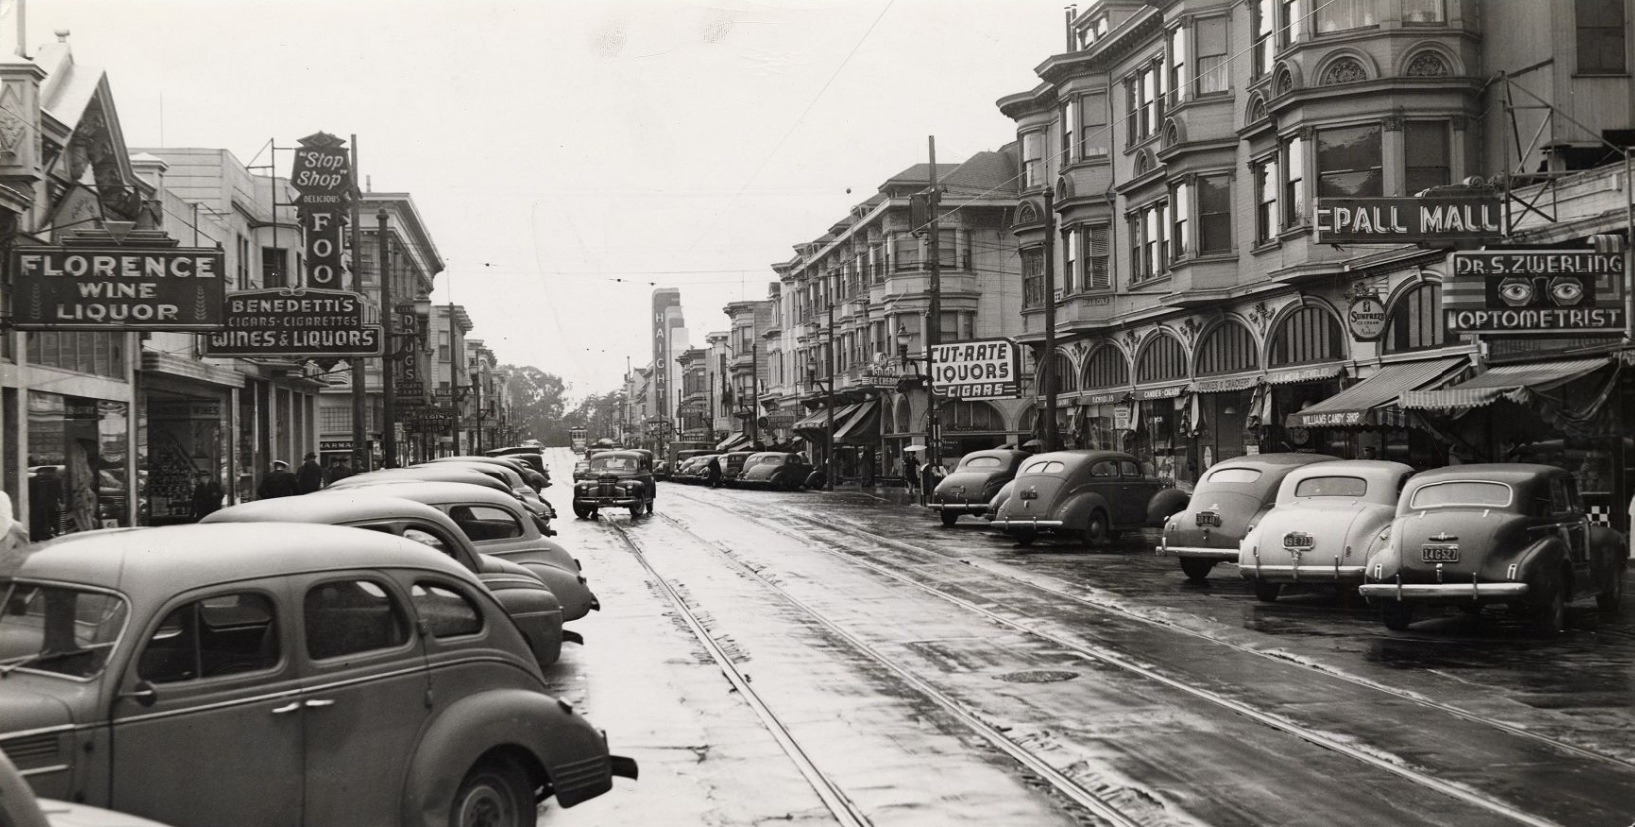 Haight Street looking west from Ashbury, 1944